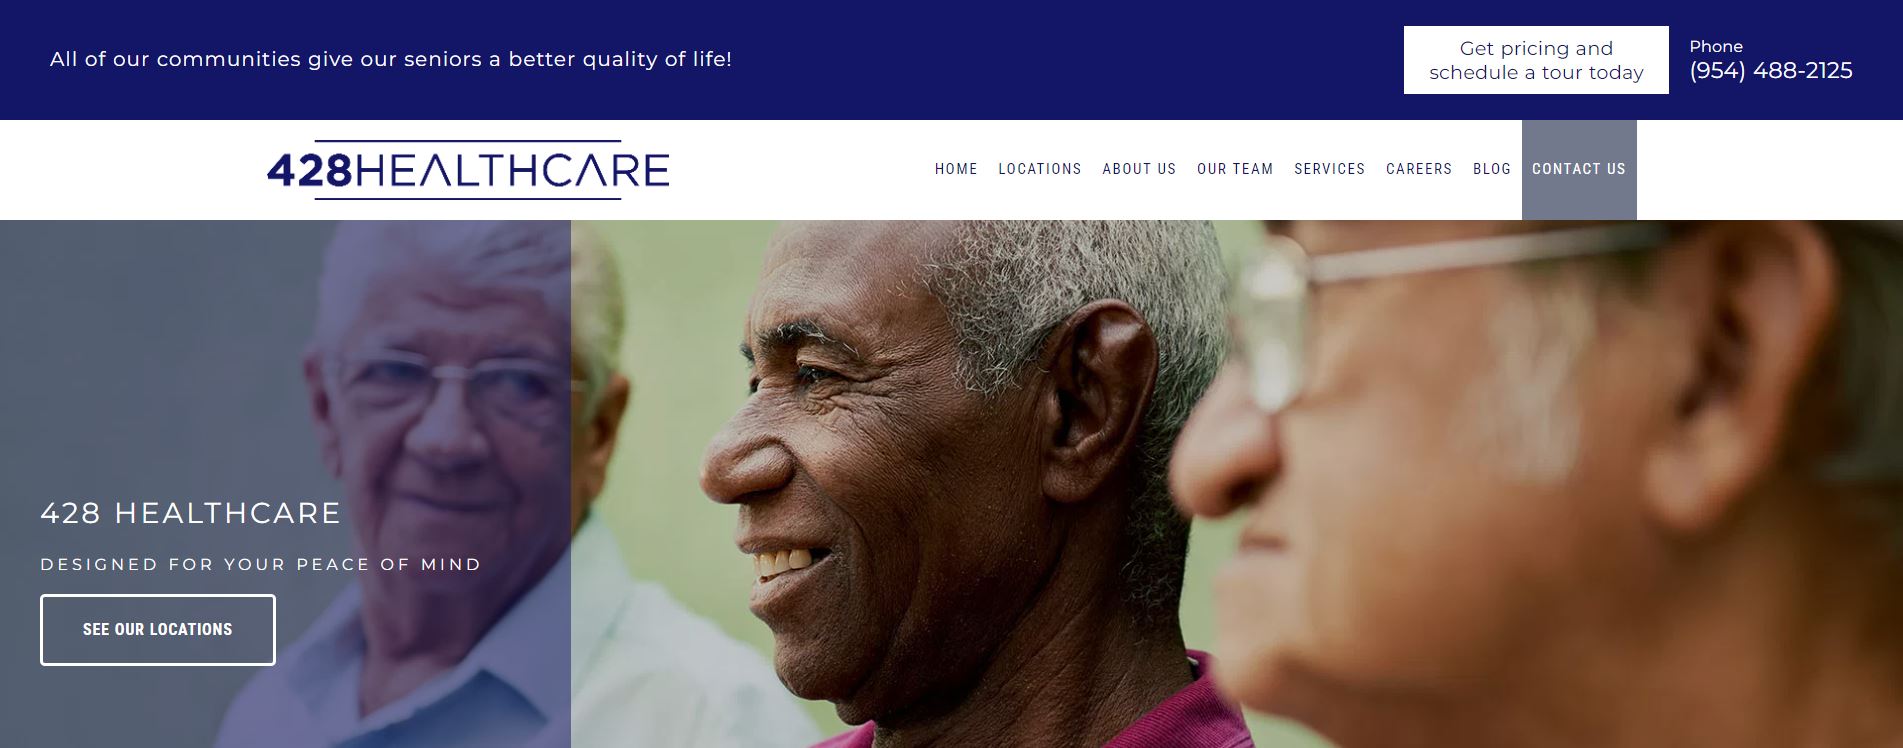 Image of a webpage screenshot showing a website for healthcare services, with a focus on an elderly man and an older woman, likely in the context of health insurance or retirement living.